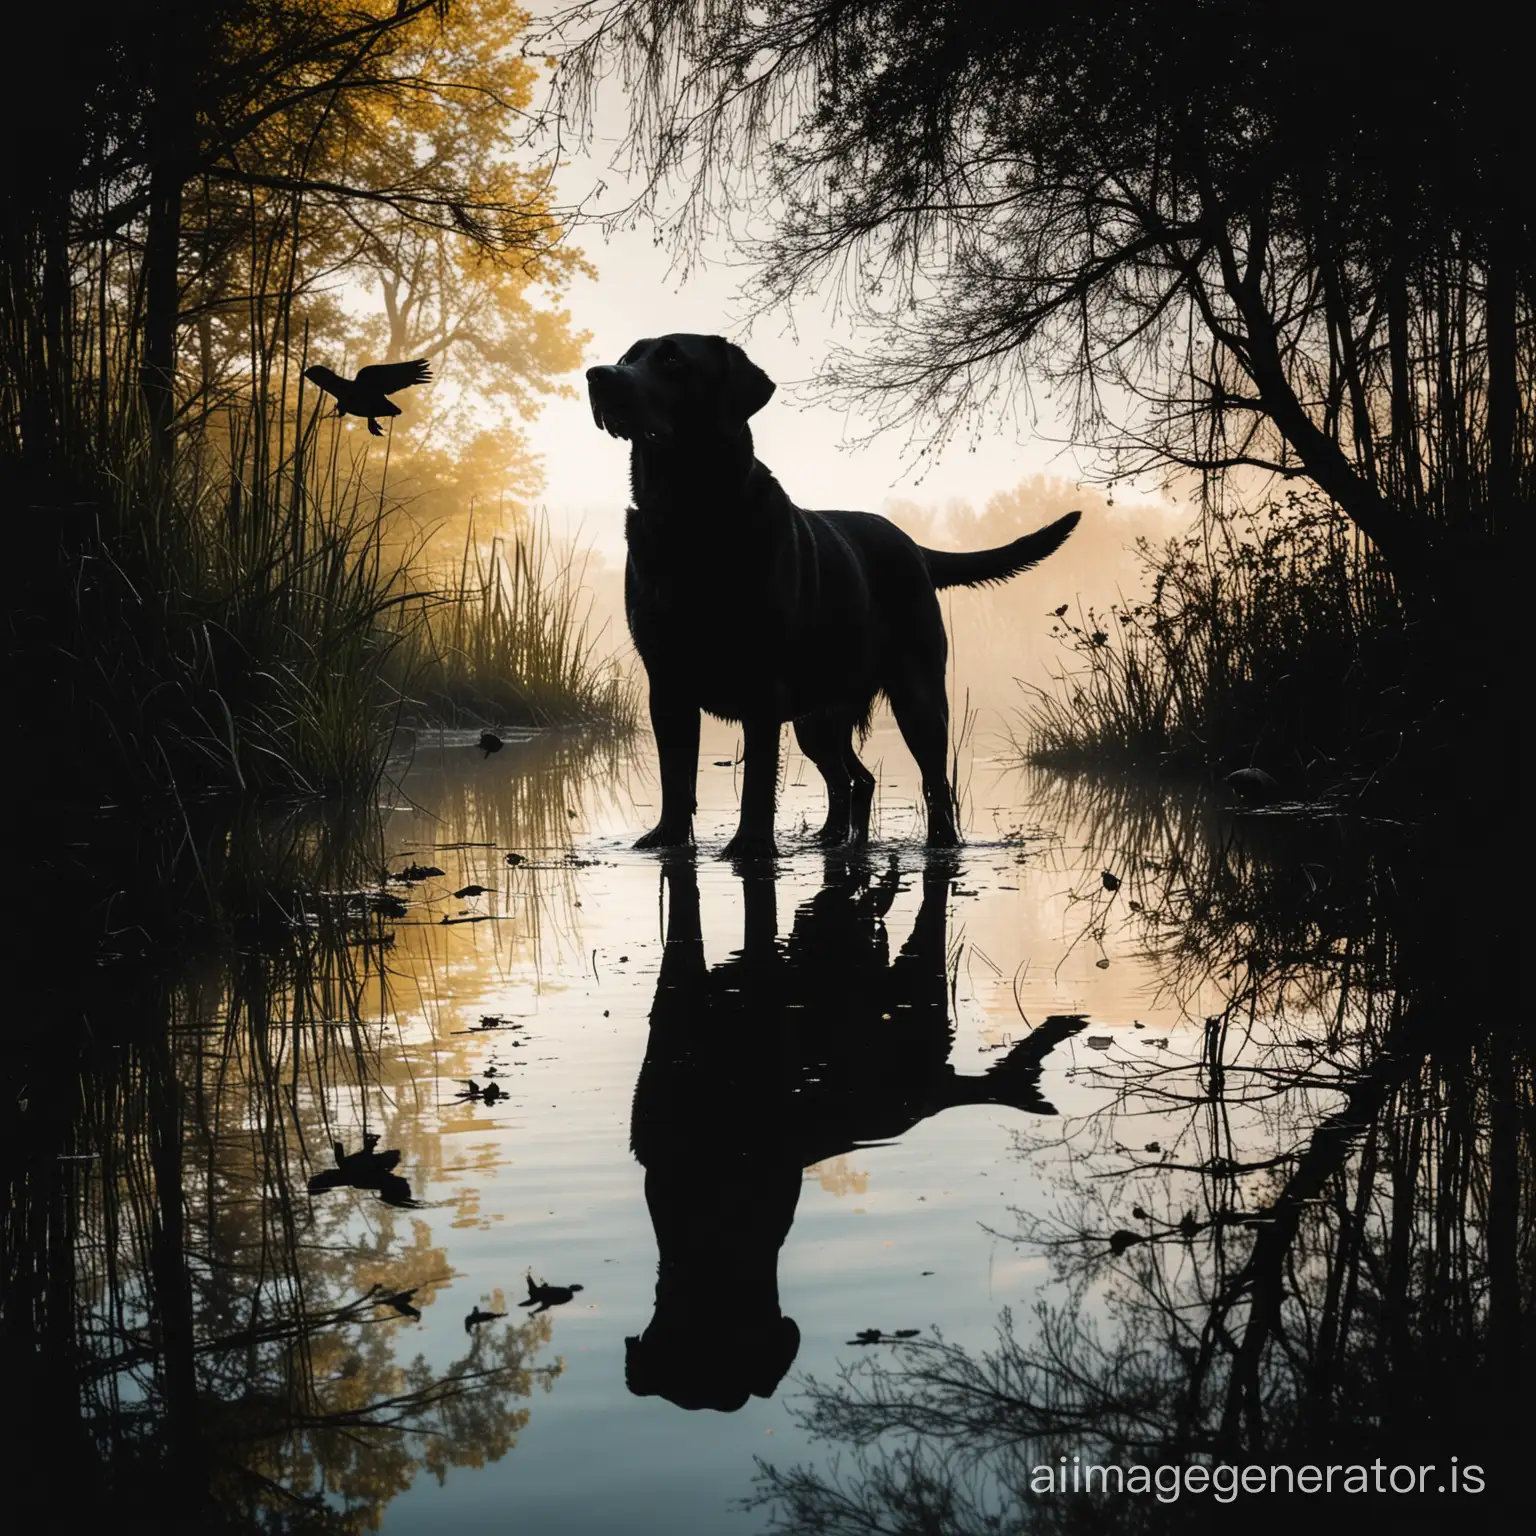 Been seeing double exposures recently. PROMPT: Double exposure. Main image is the silhouette of a labrador, inside the silhouette is a pond with ducks. Alcohol ink.